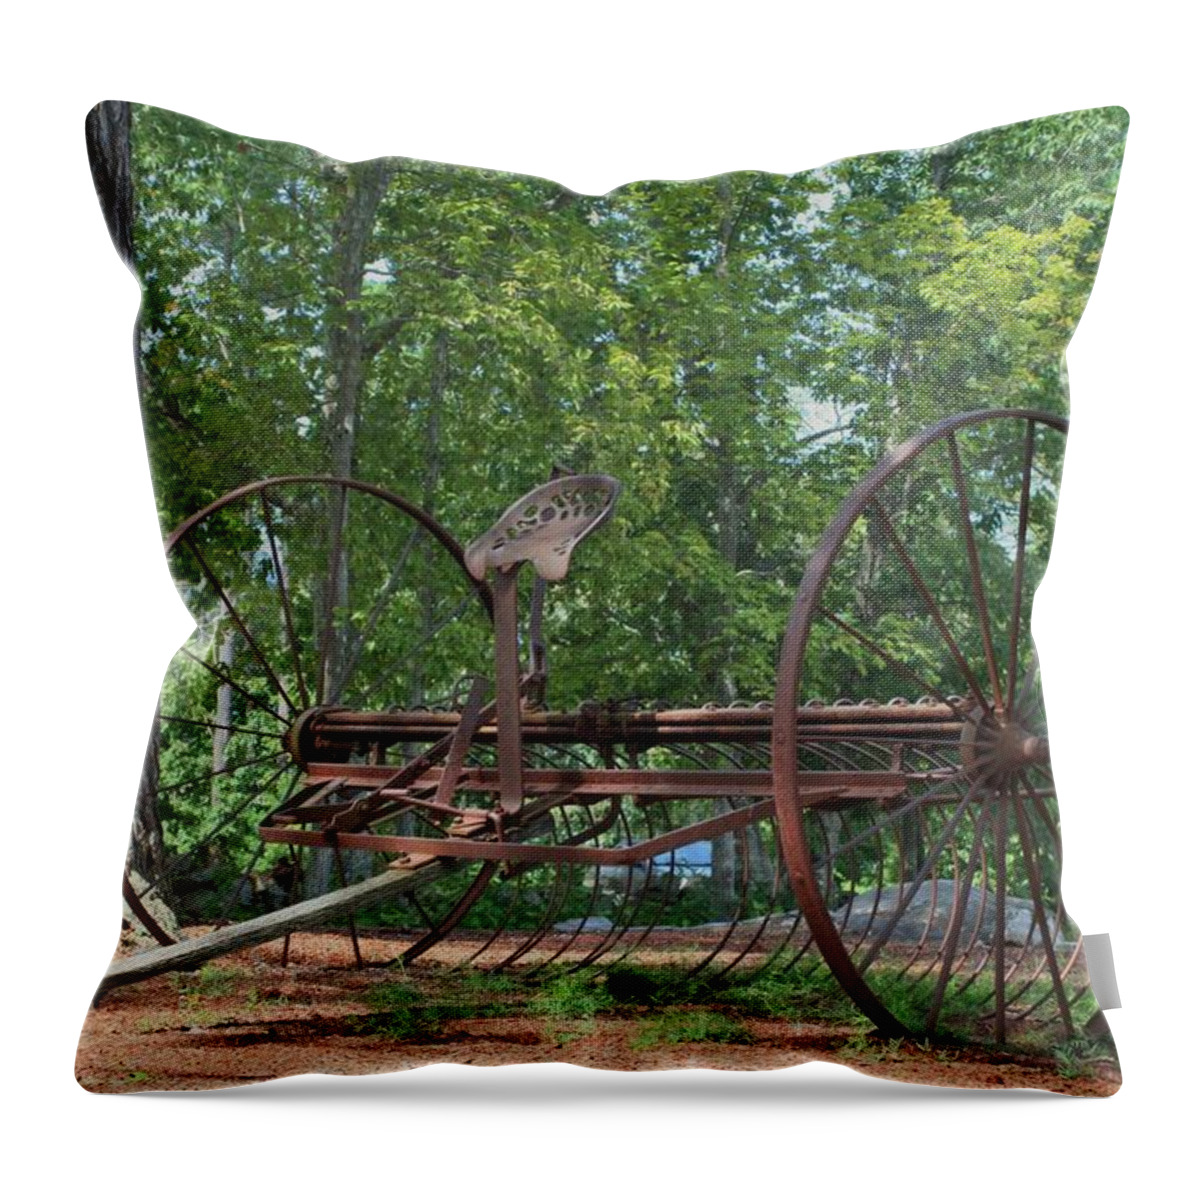 Retired Throw Pillow featuring the photograph Retired by Barbara S Nickerson